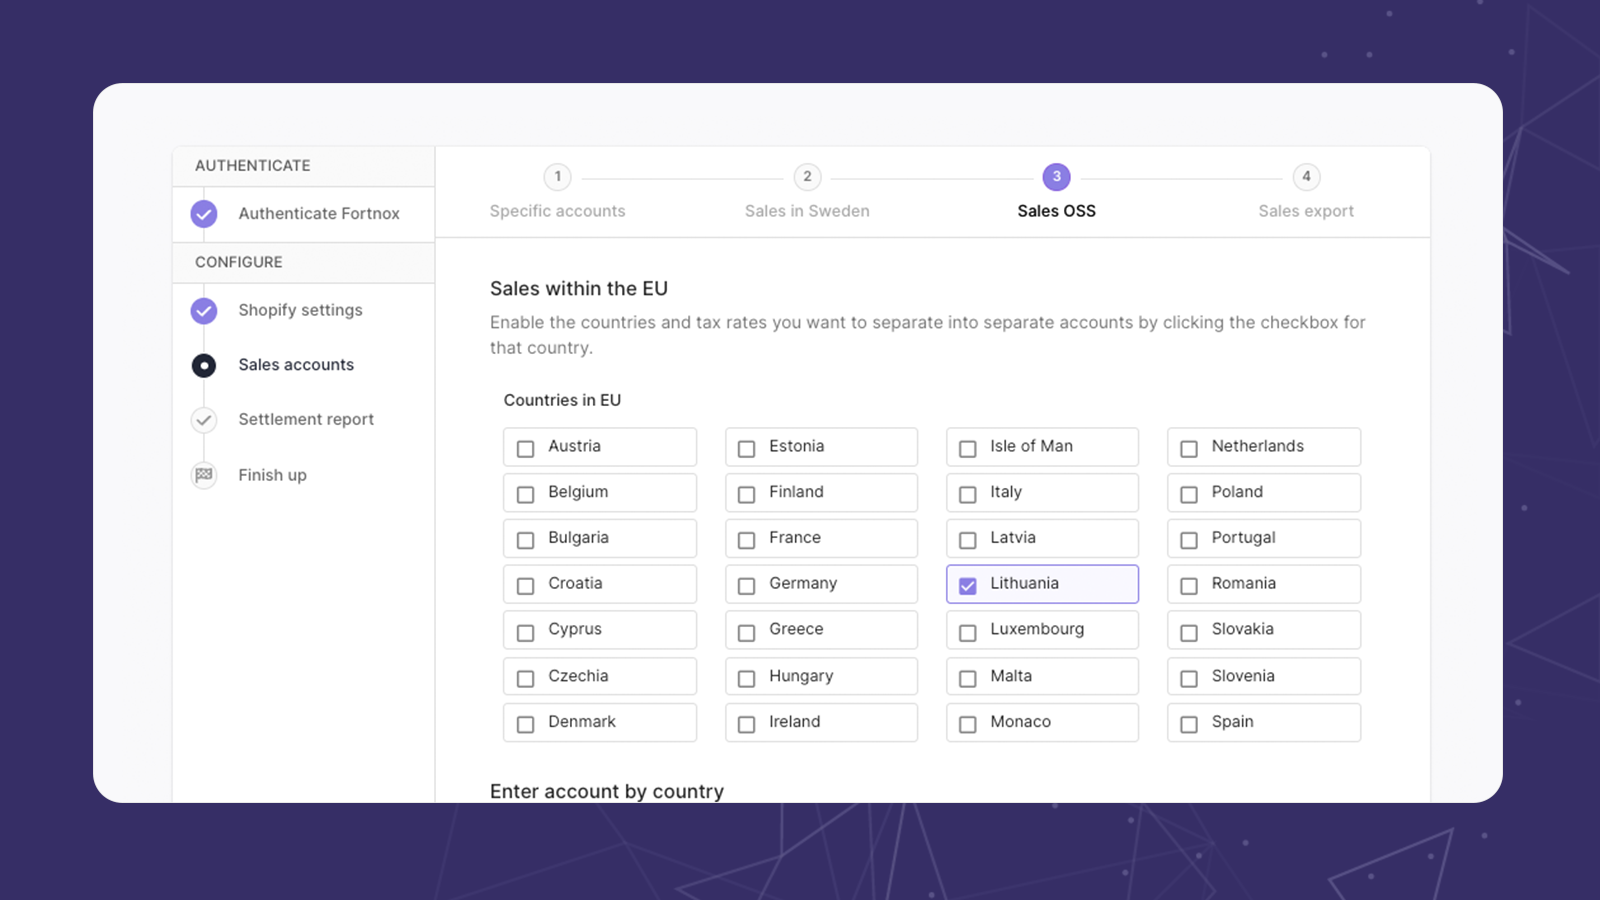 Decide how you want to configure your sales for each country